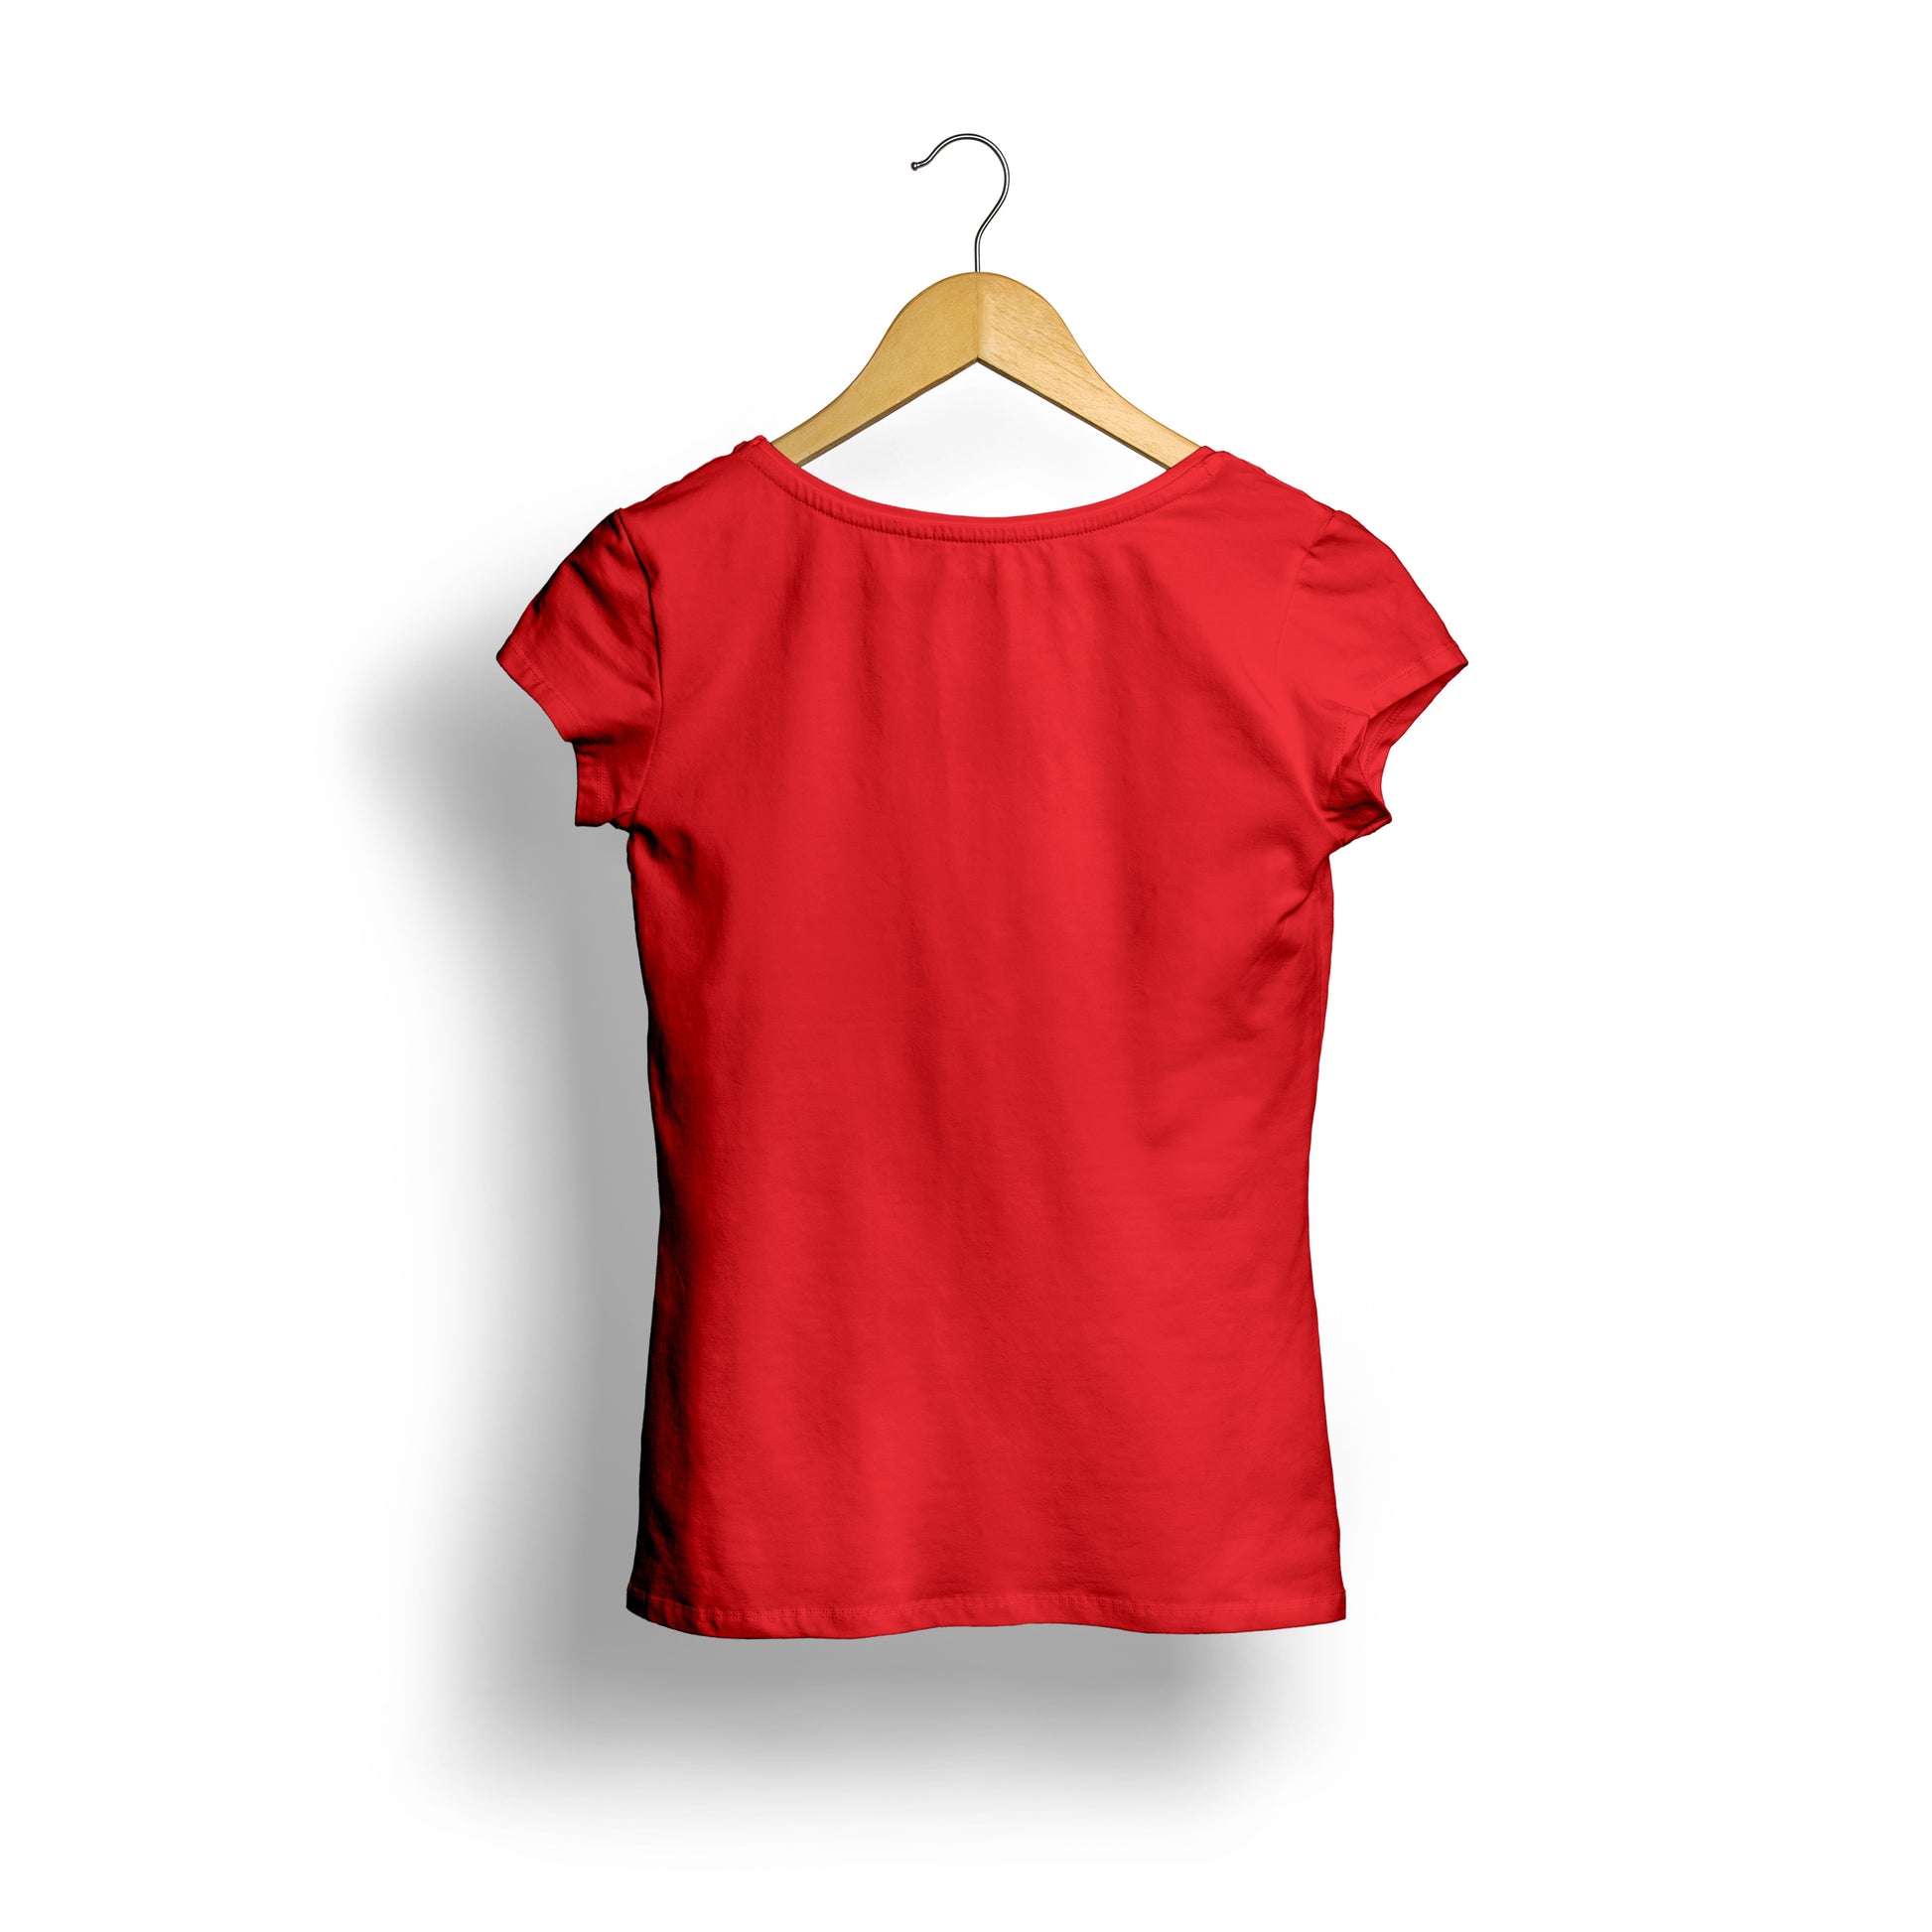 Bride to be t shirt for women- Red